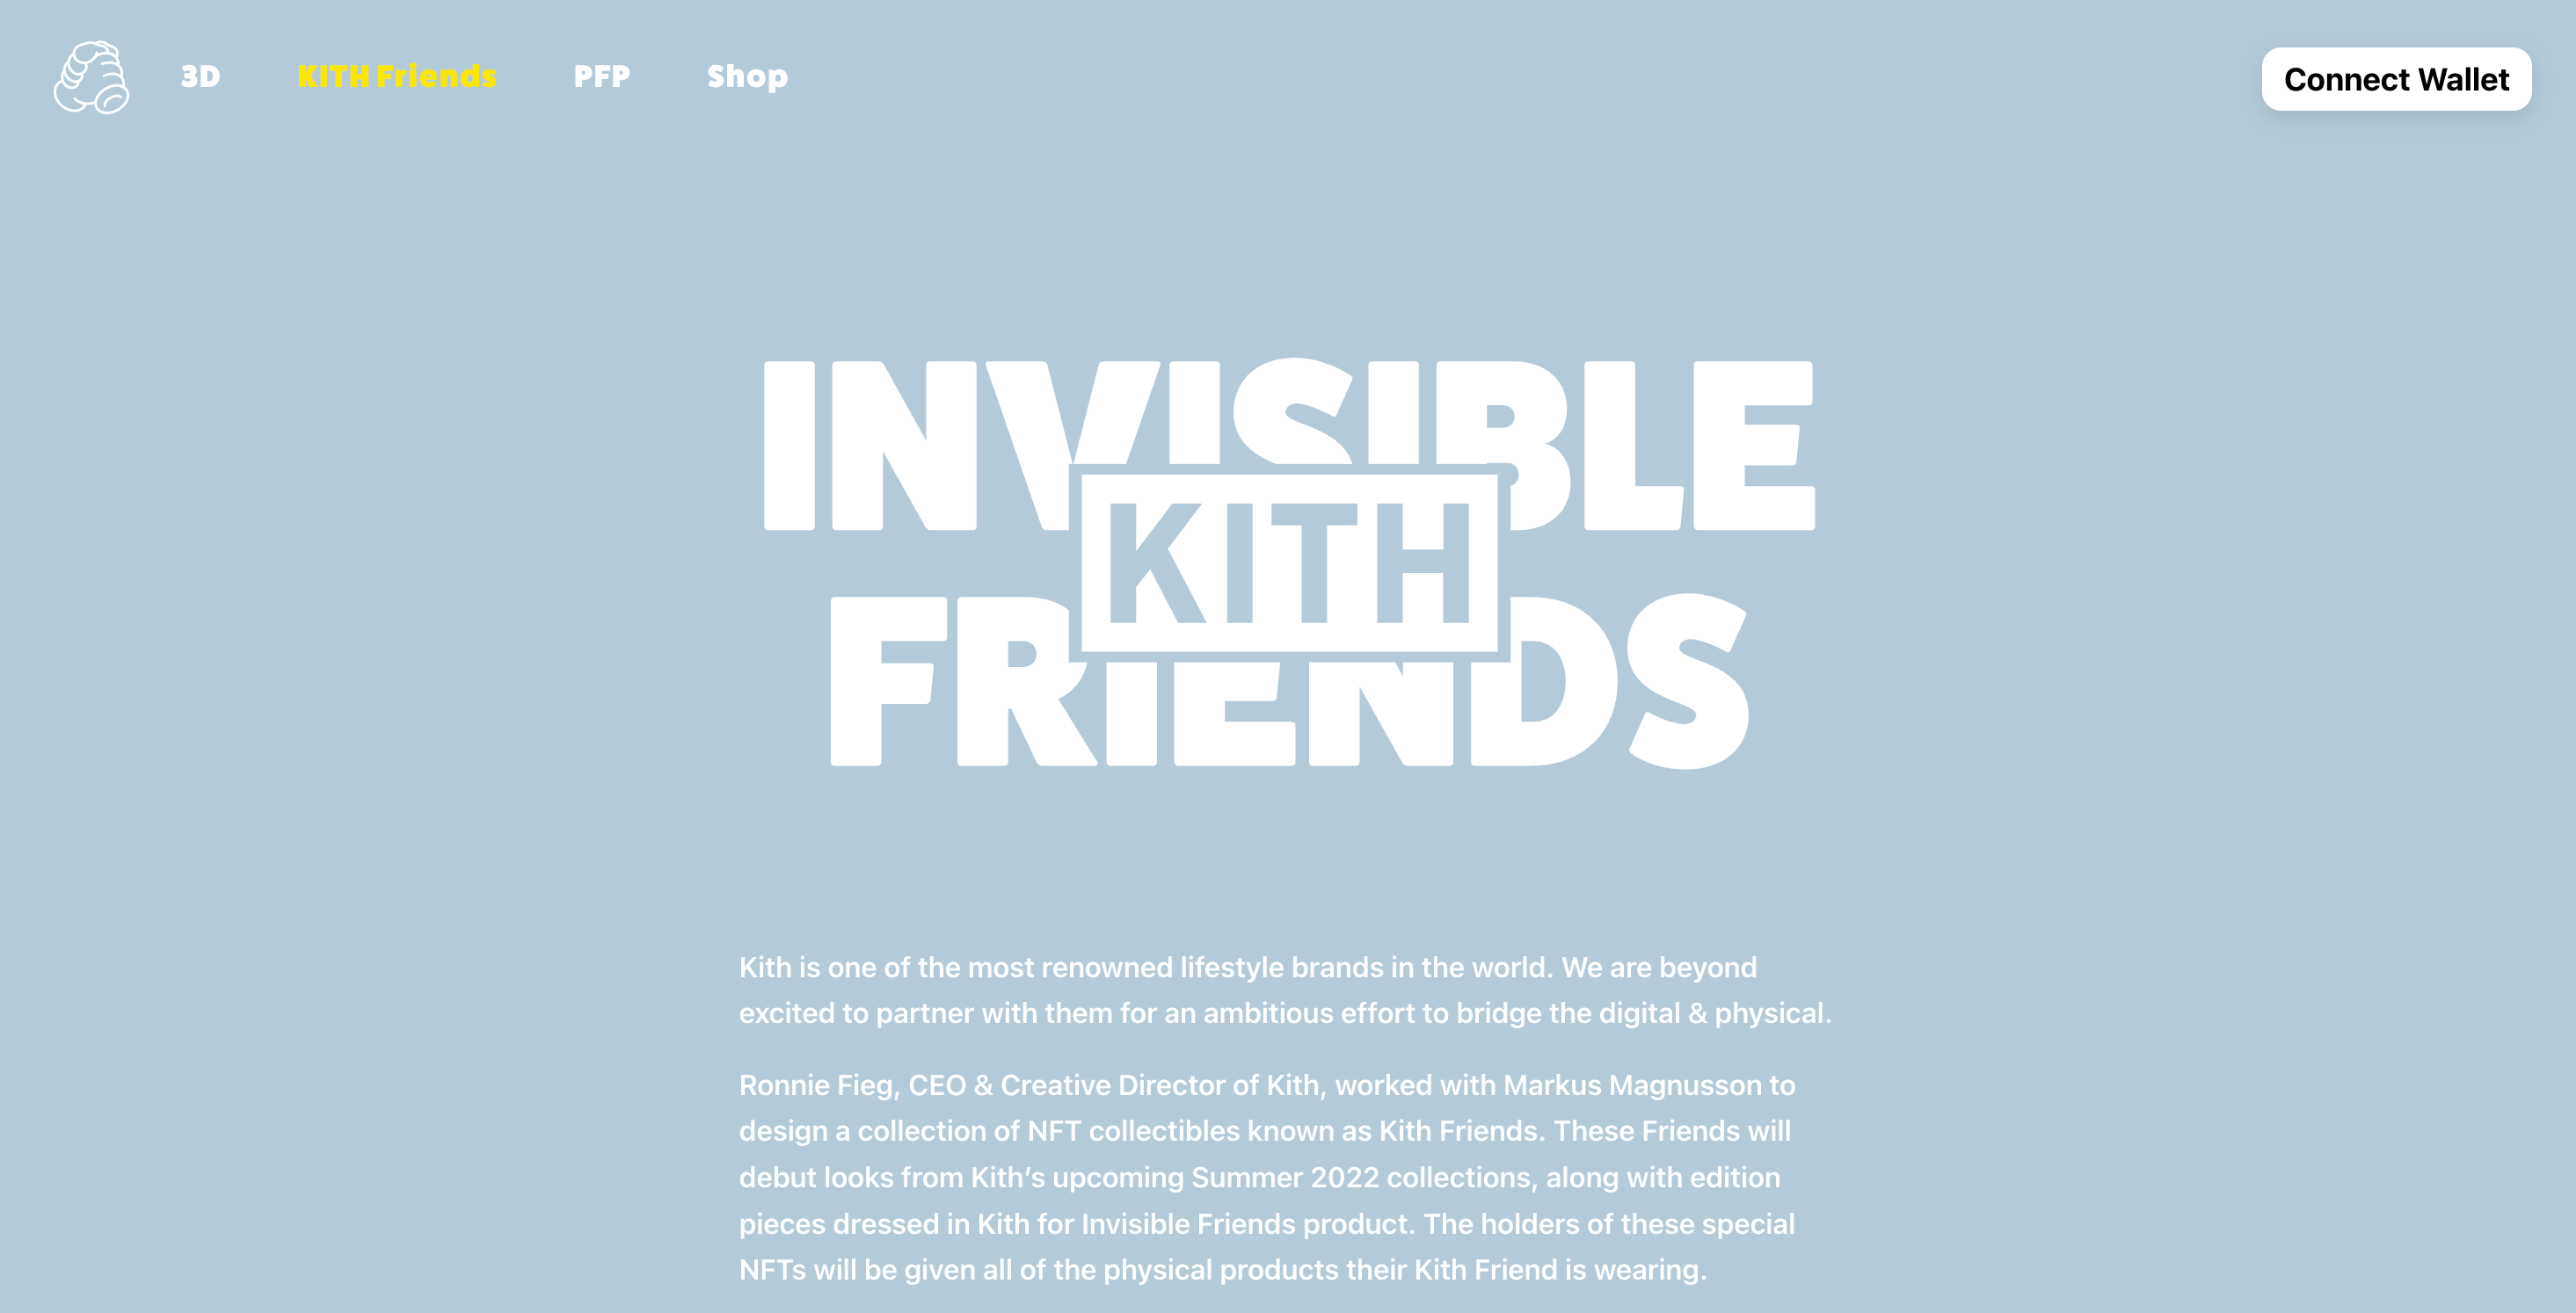 image of invisible friends kith collaboration shopify storefront nft token gated website